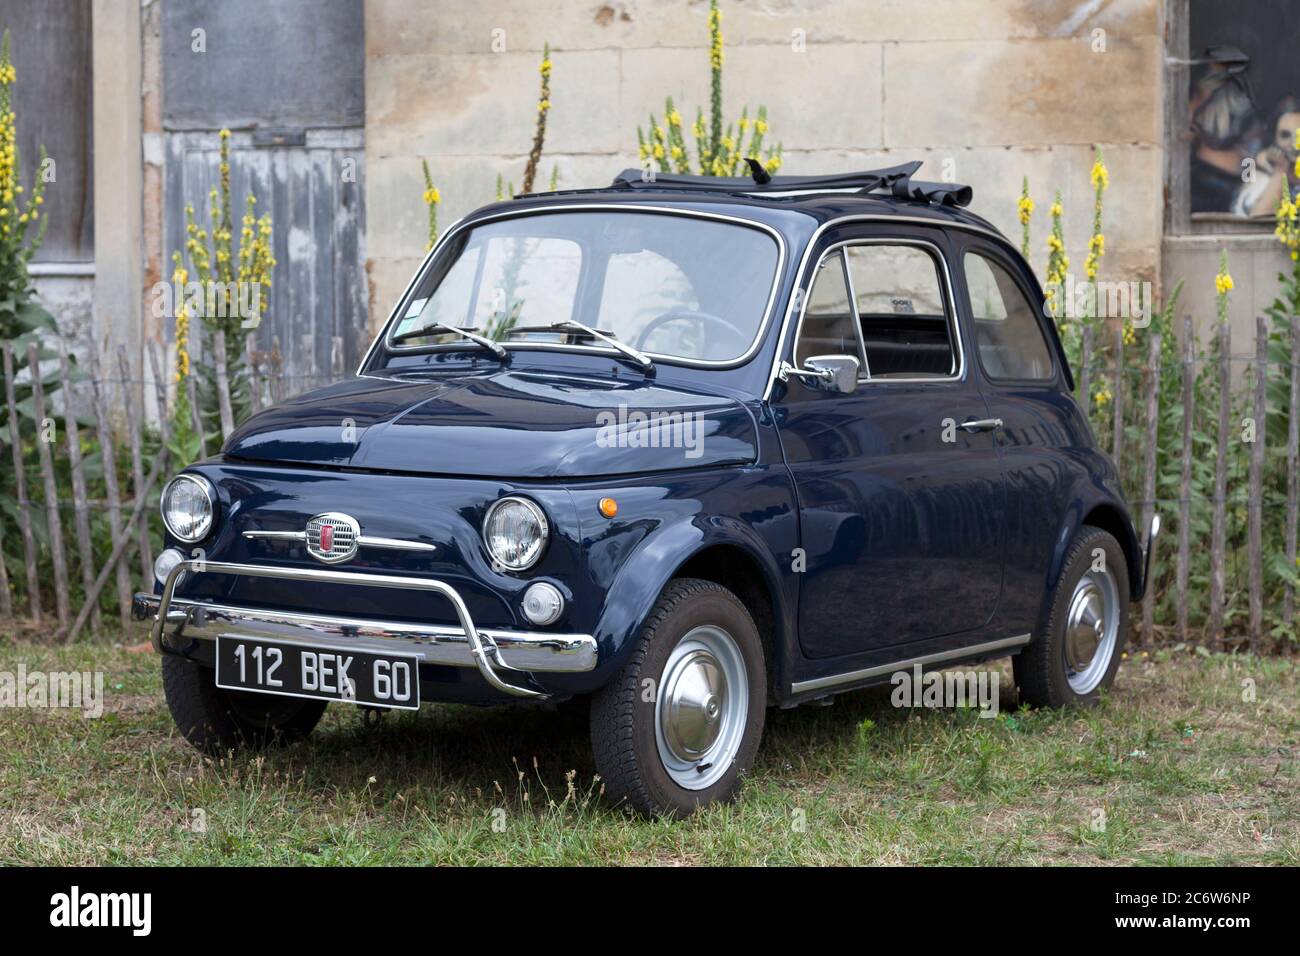 Lamorlaye, France - July 05 2020: The Fiat 500 is a small city car that was manufactured and marketed by Fiat Automobiles from 1957 to 1975. Stock Photo